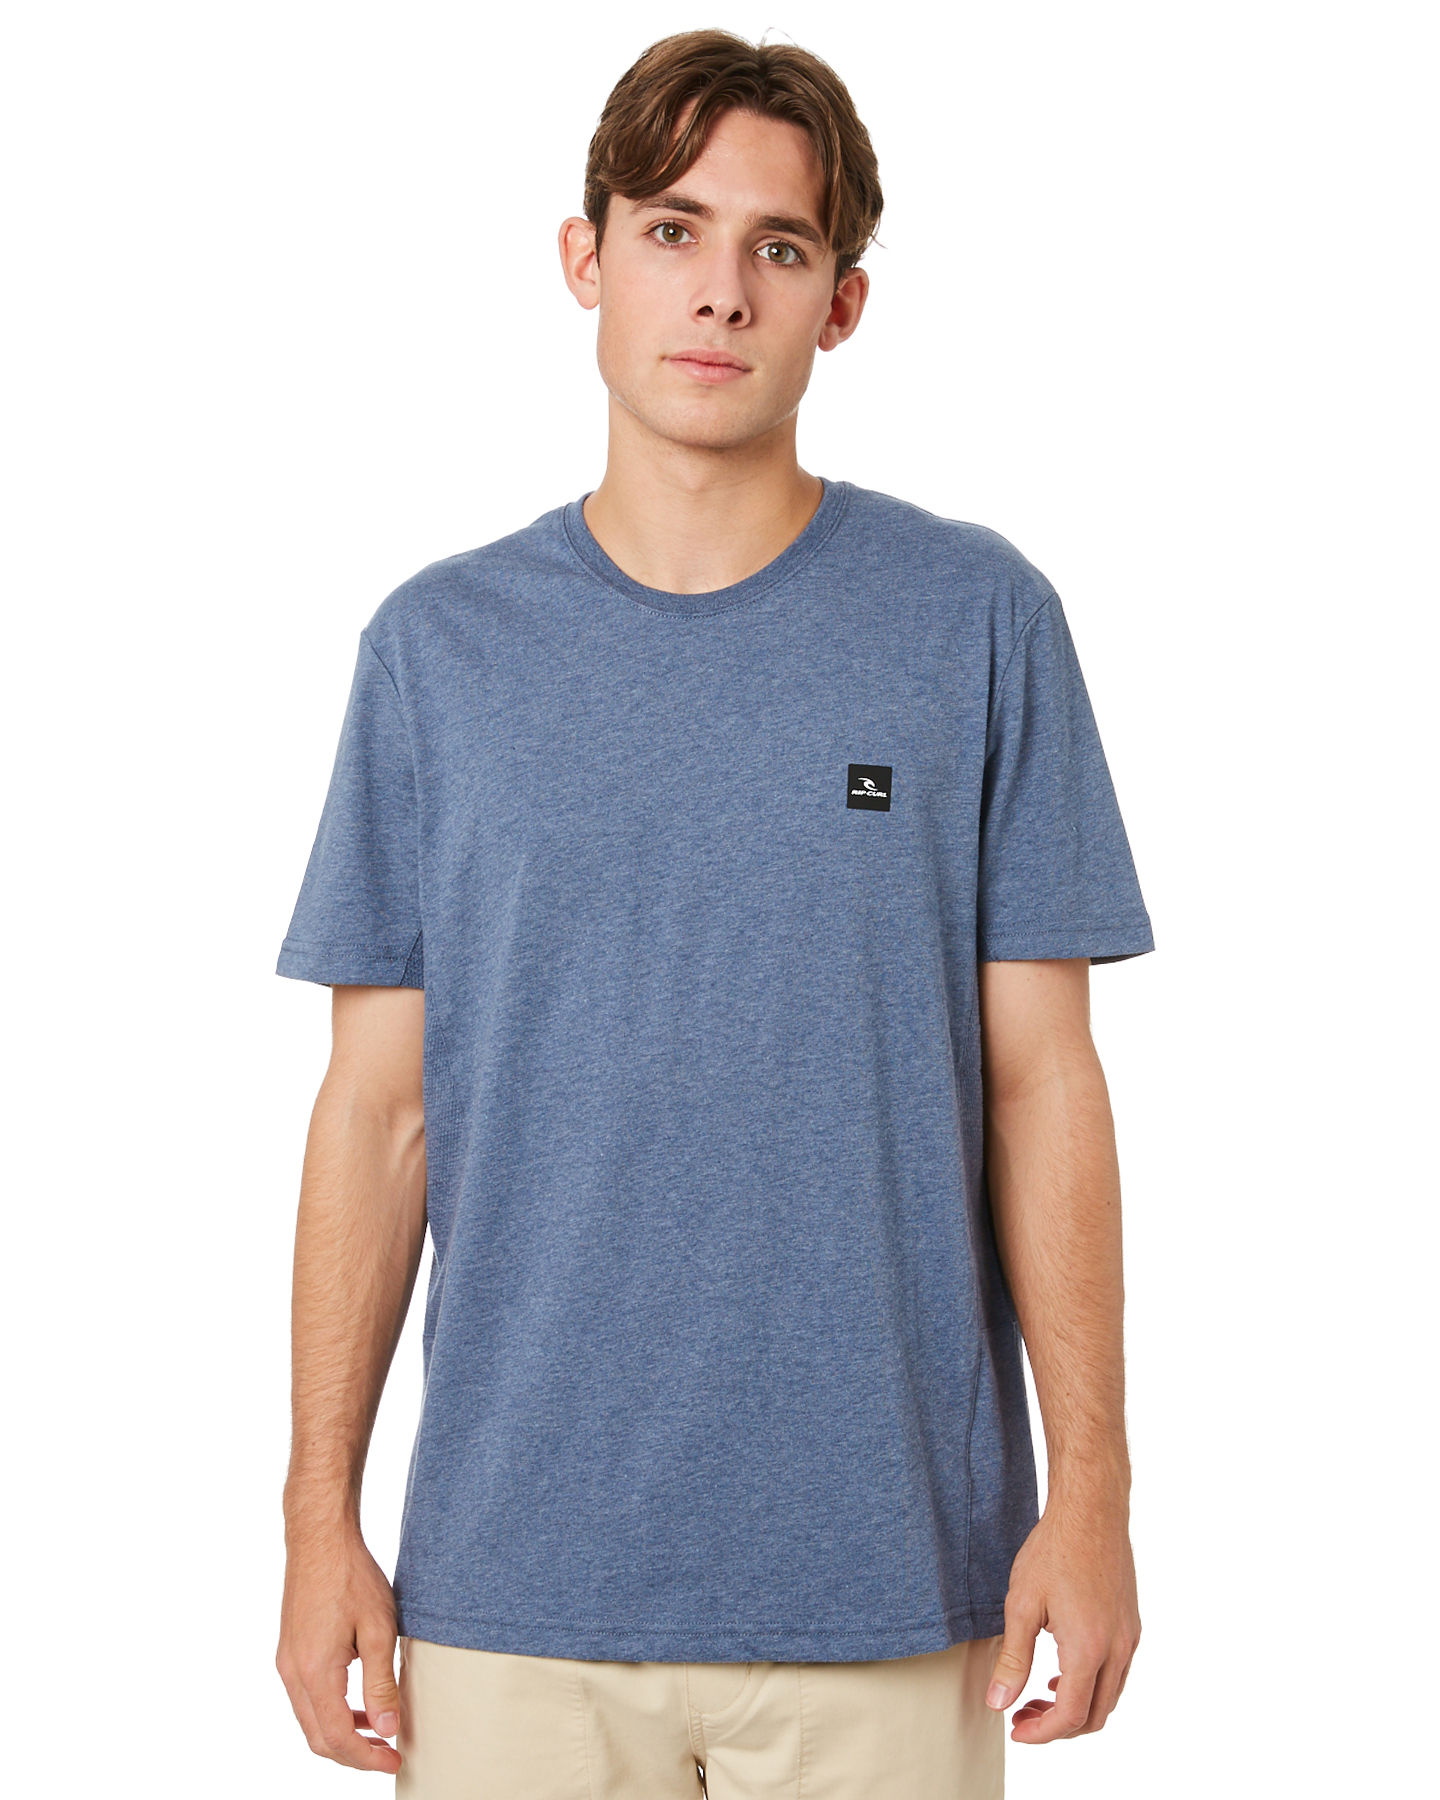 Rip Curl Pivoting Vaporcool Tee - Mid Blue Marle | SurfStitch